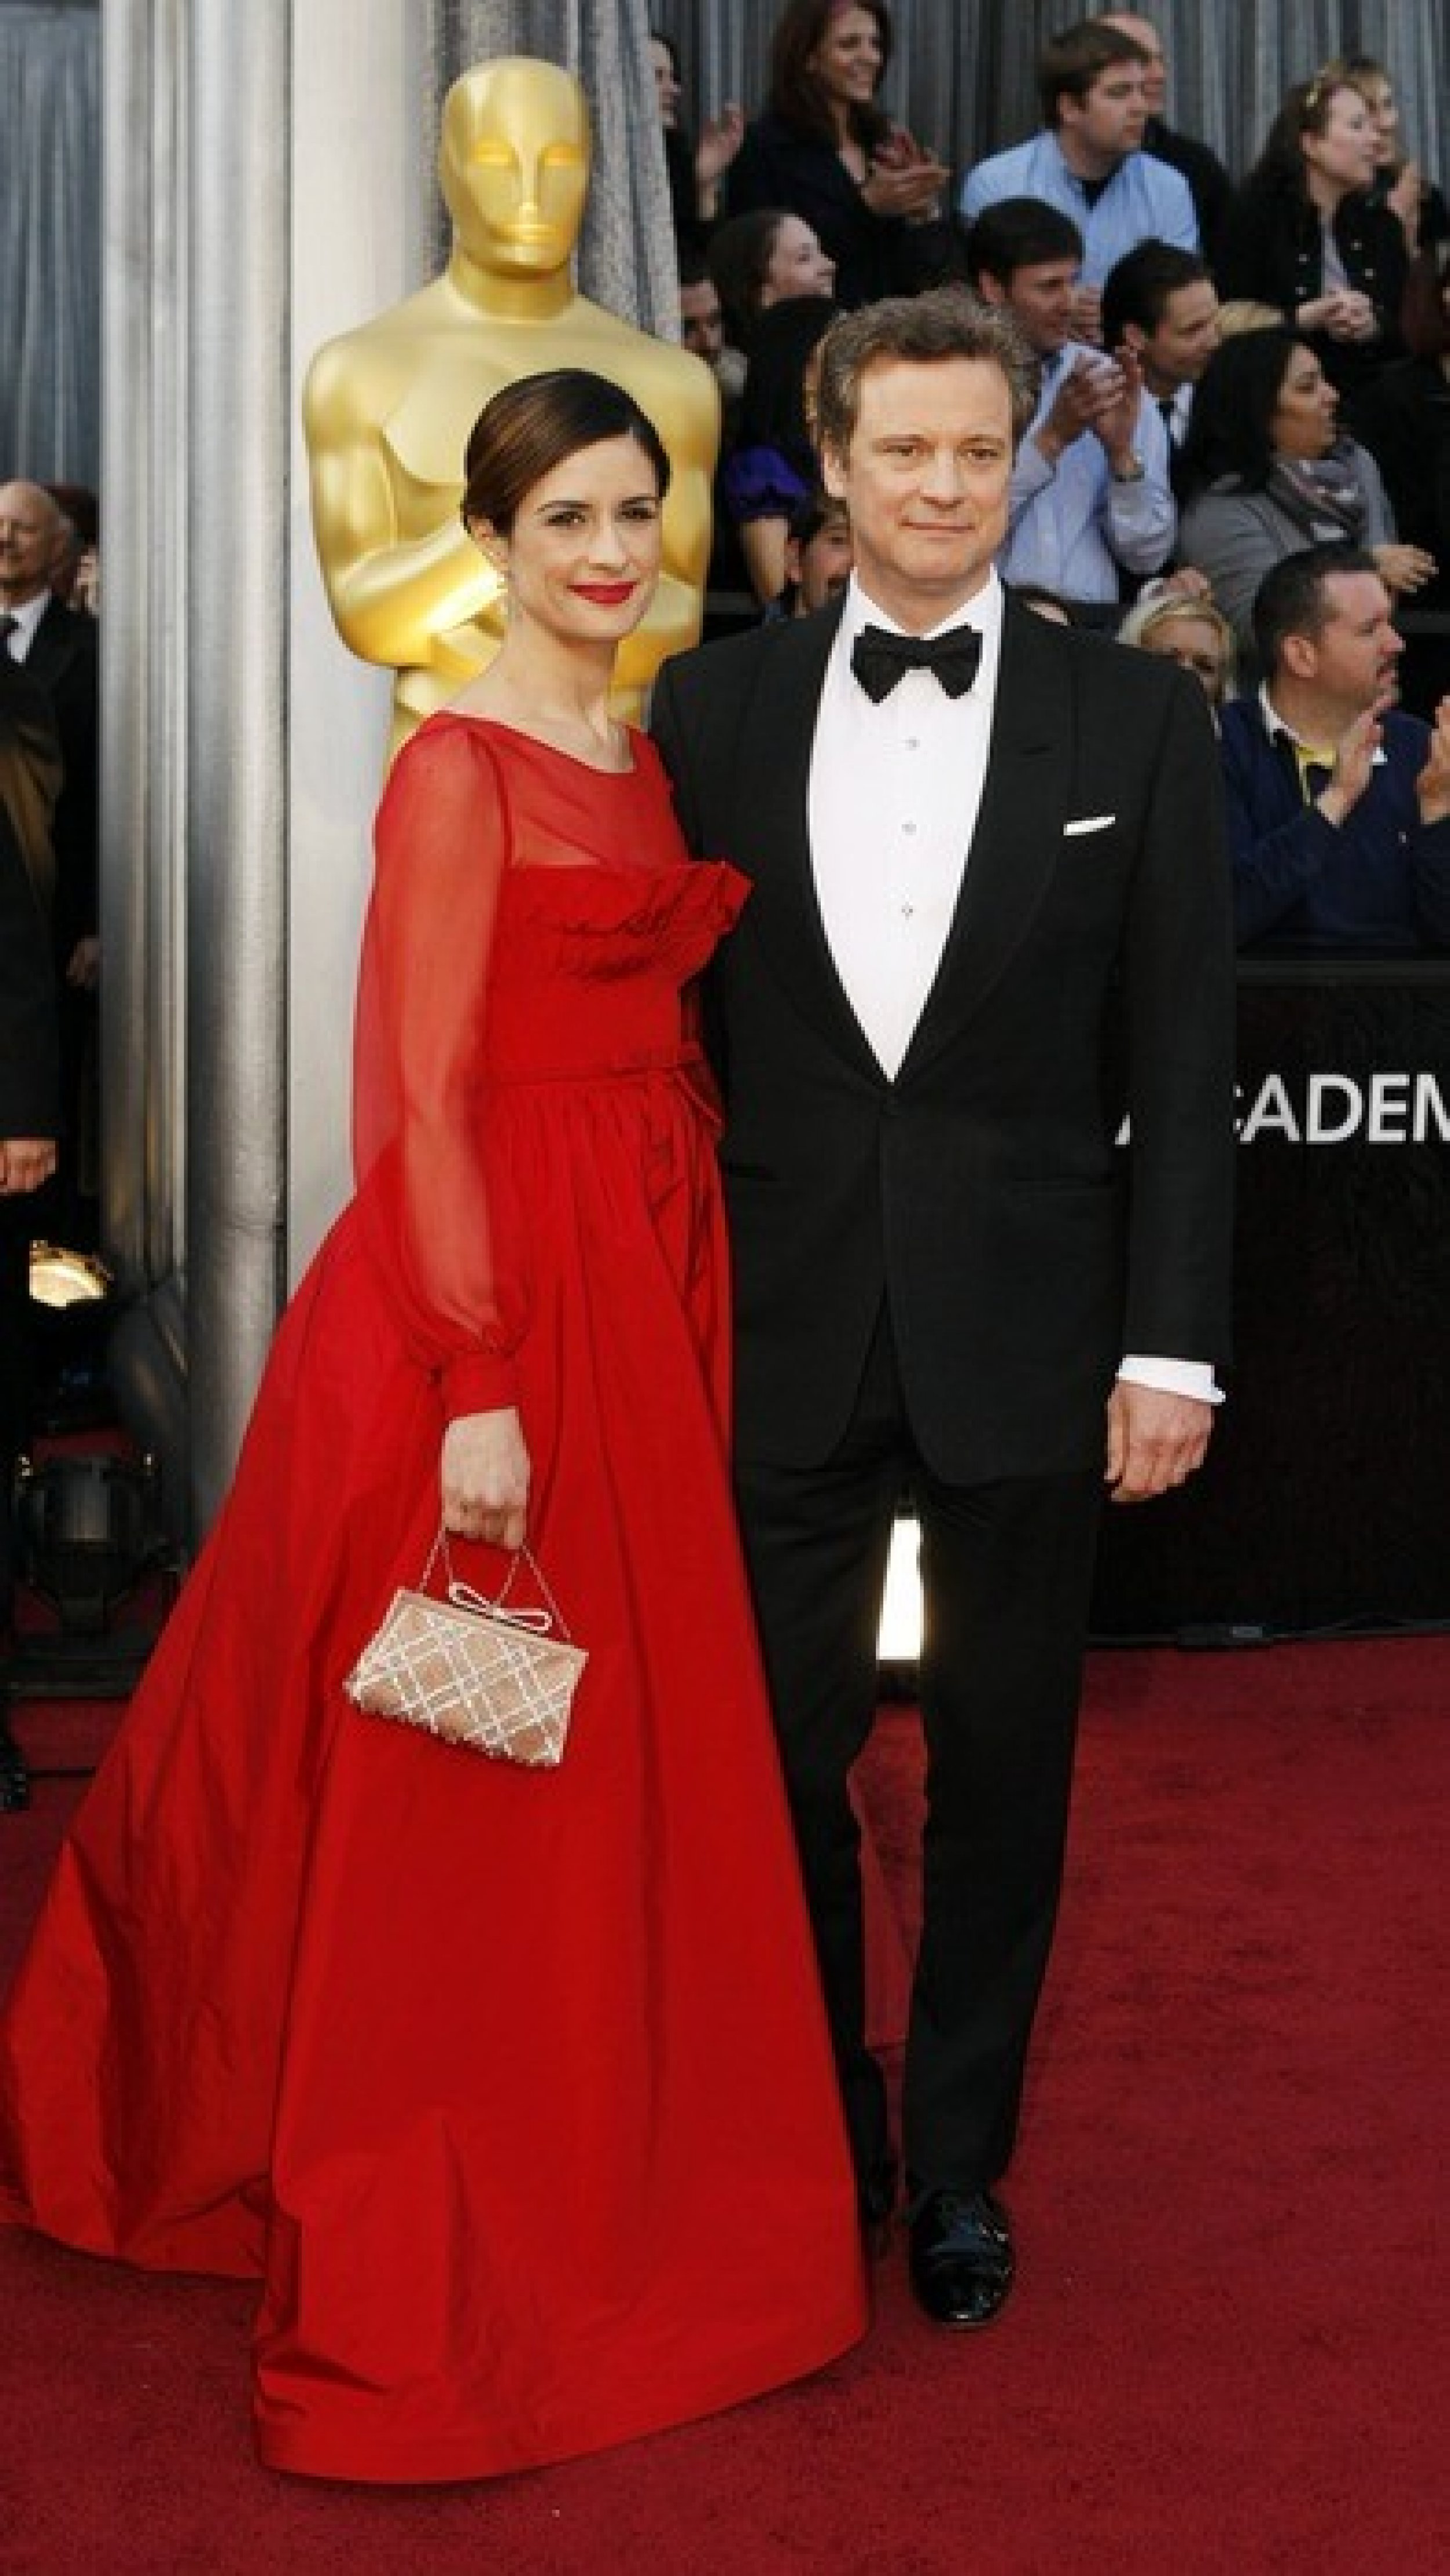 Colin Firth and Livia Giuggioli arrive at the 84th Academy Awards.